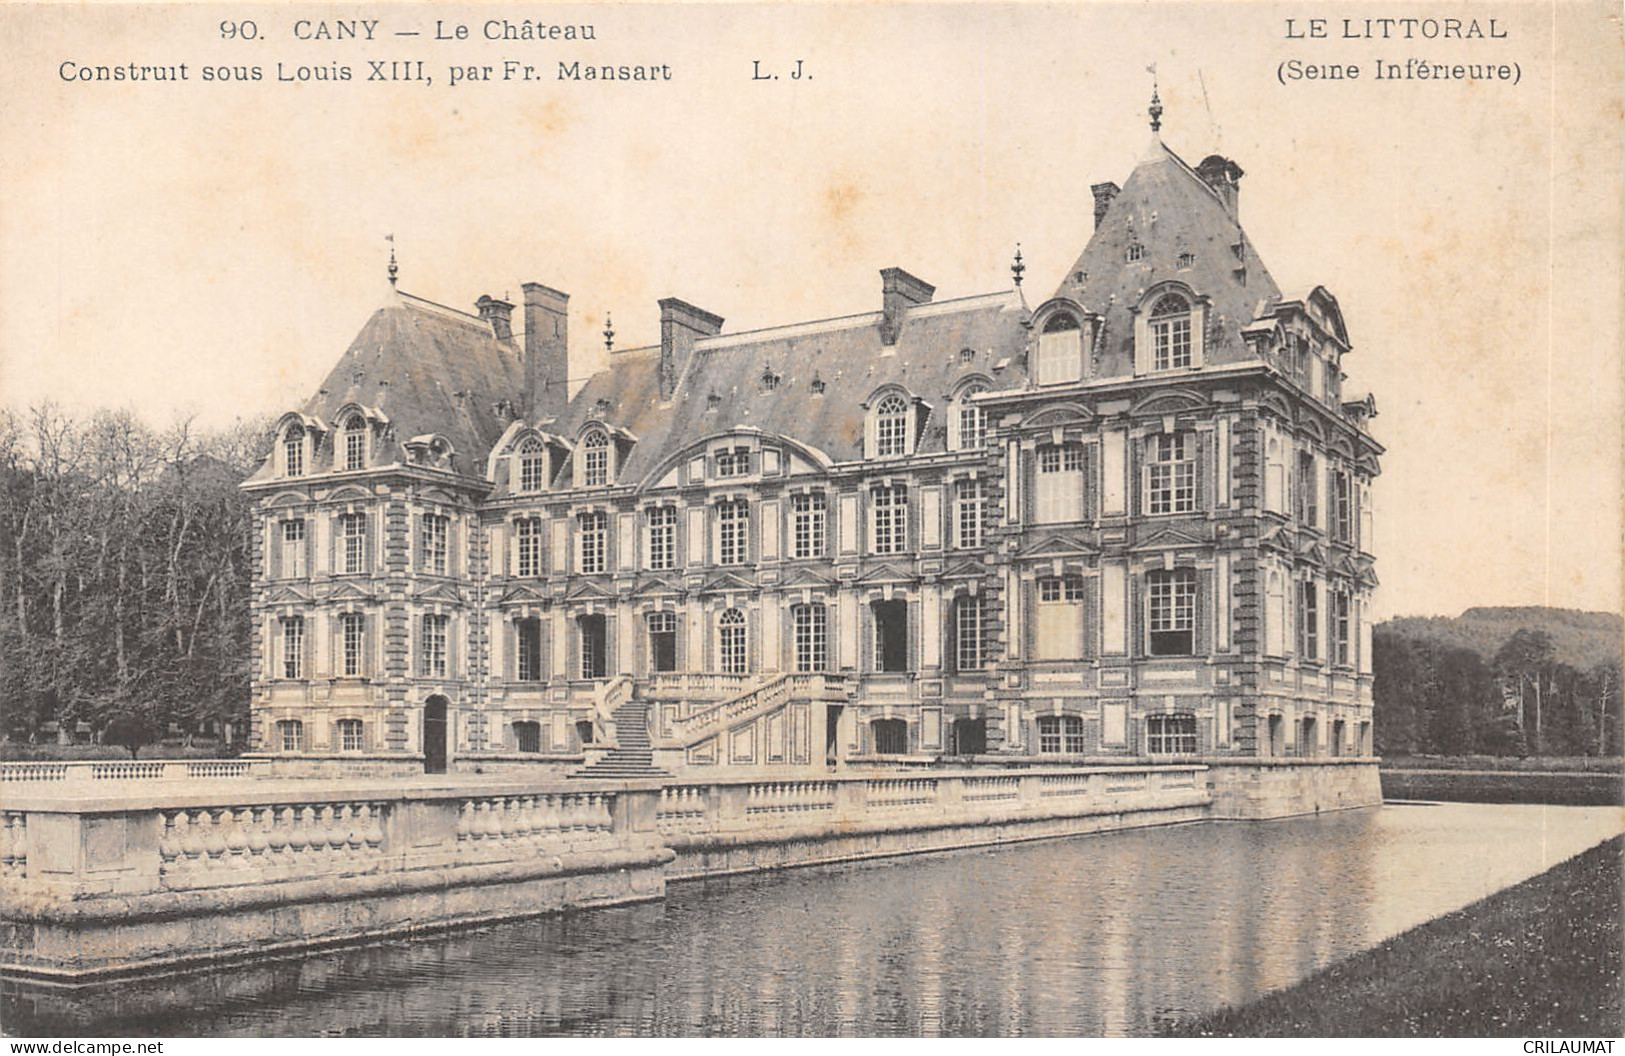 76-CANY BARVILLE-LE CHATEAU-N 6010-C/0297 - Cany Barville